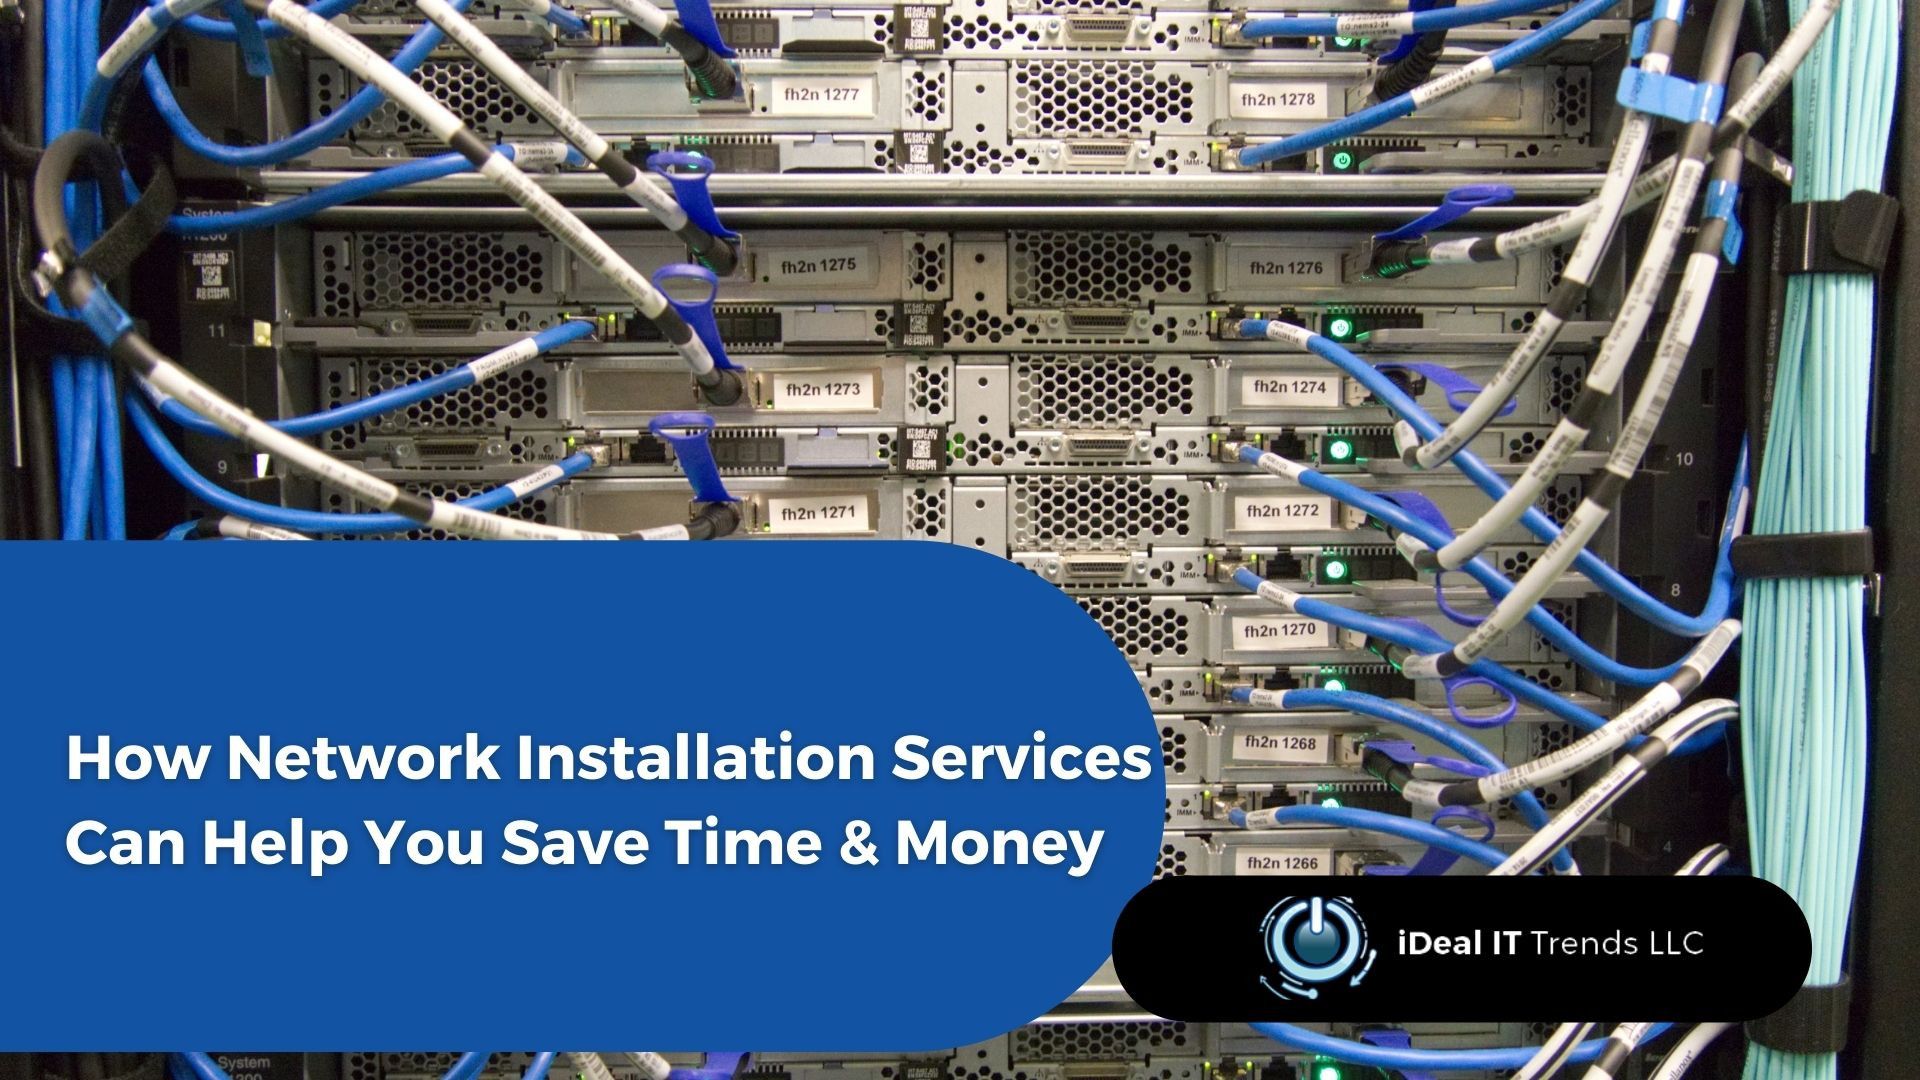 How Network Installation Services Can Help You Save Time & Money